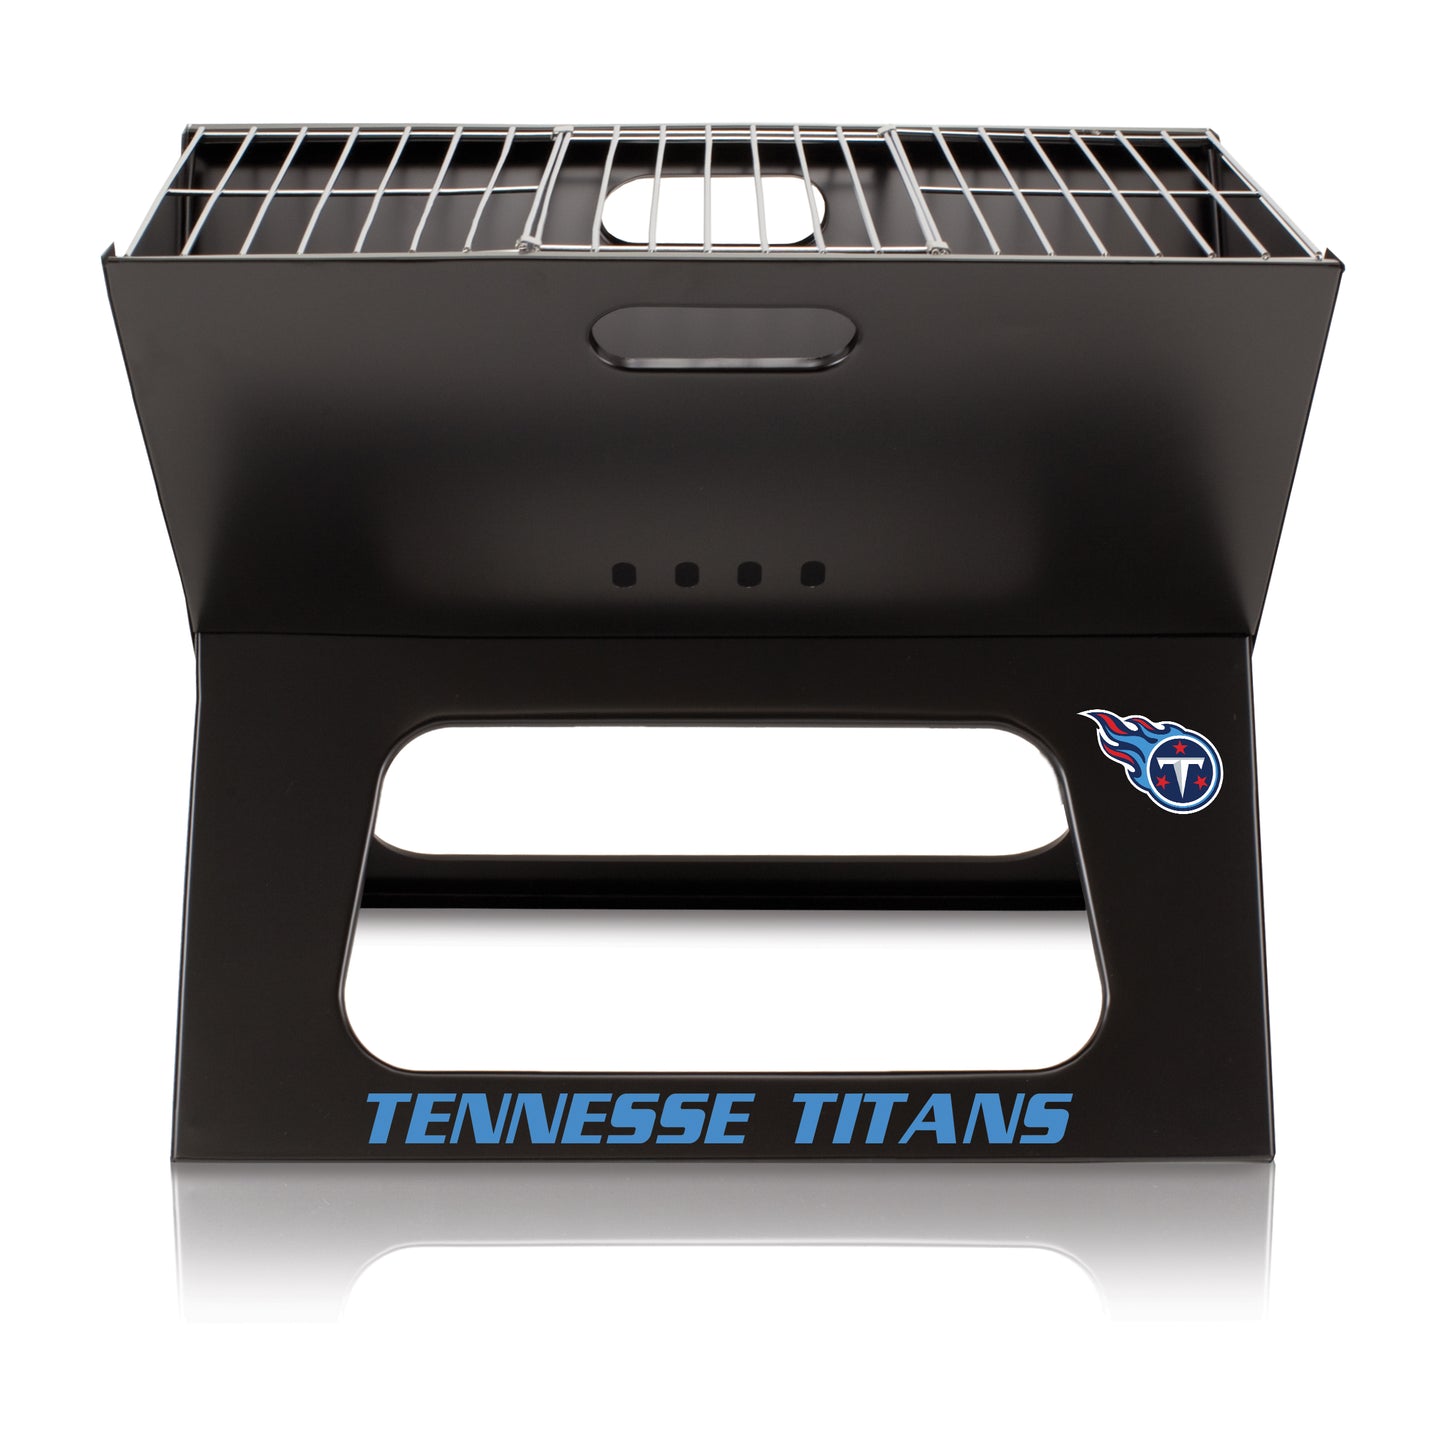 Tennessee Titans - X-Grill Portable Charcoal BBQ Grill